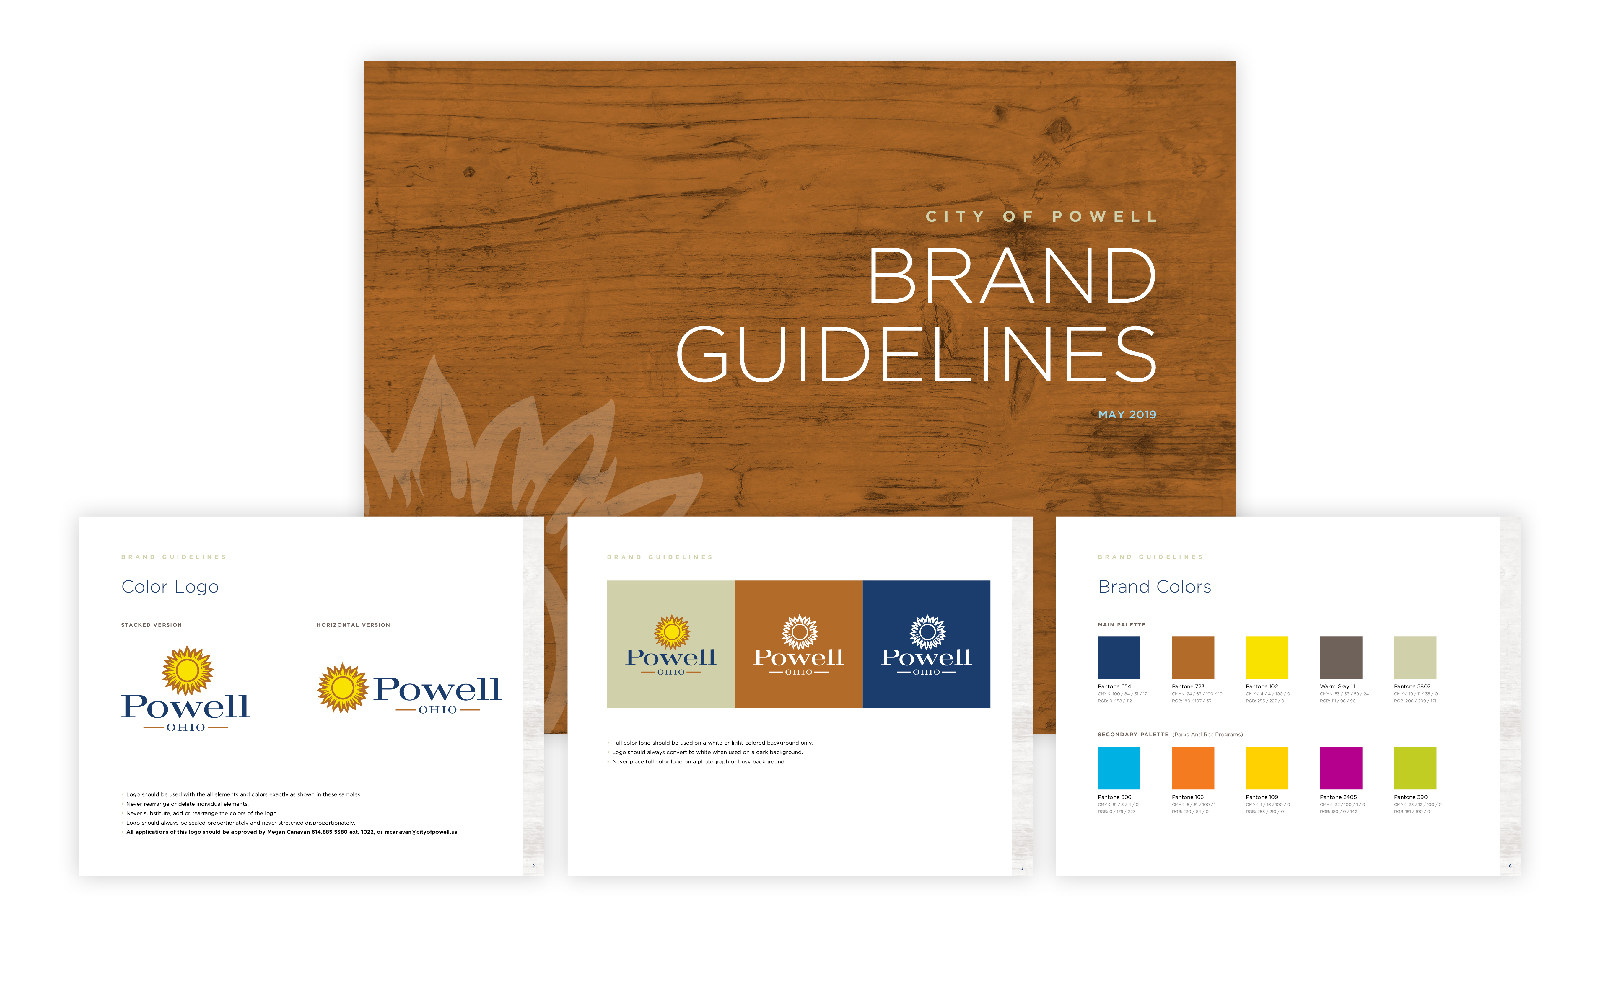 City of Powell Brand Guidelines